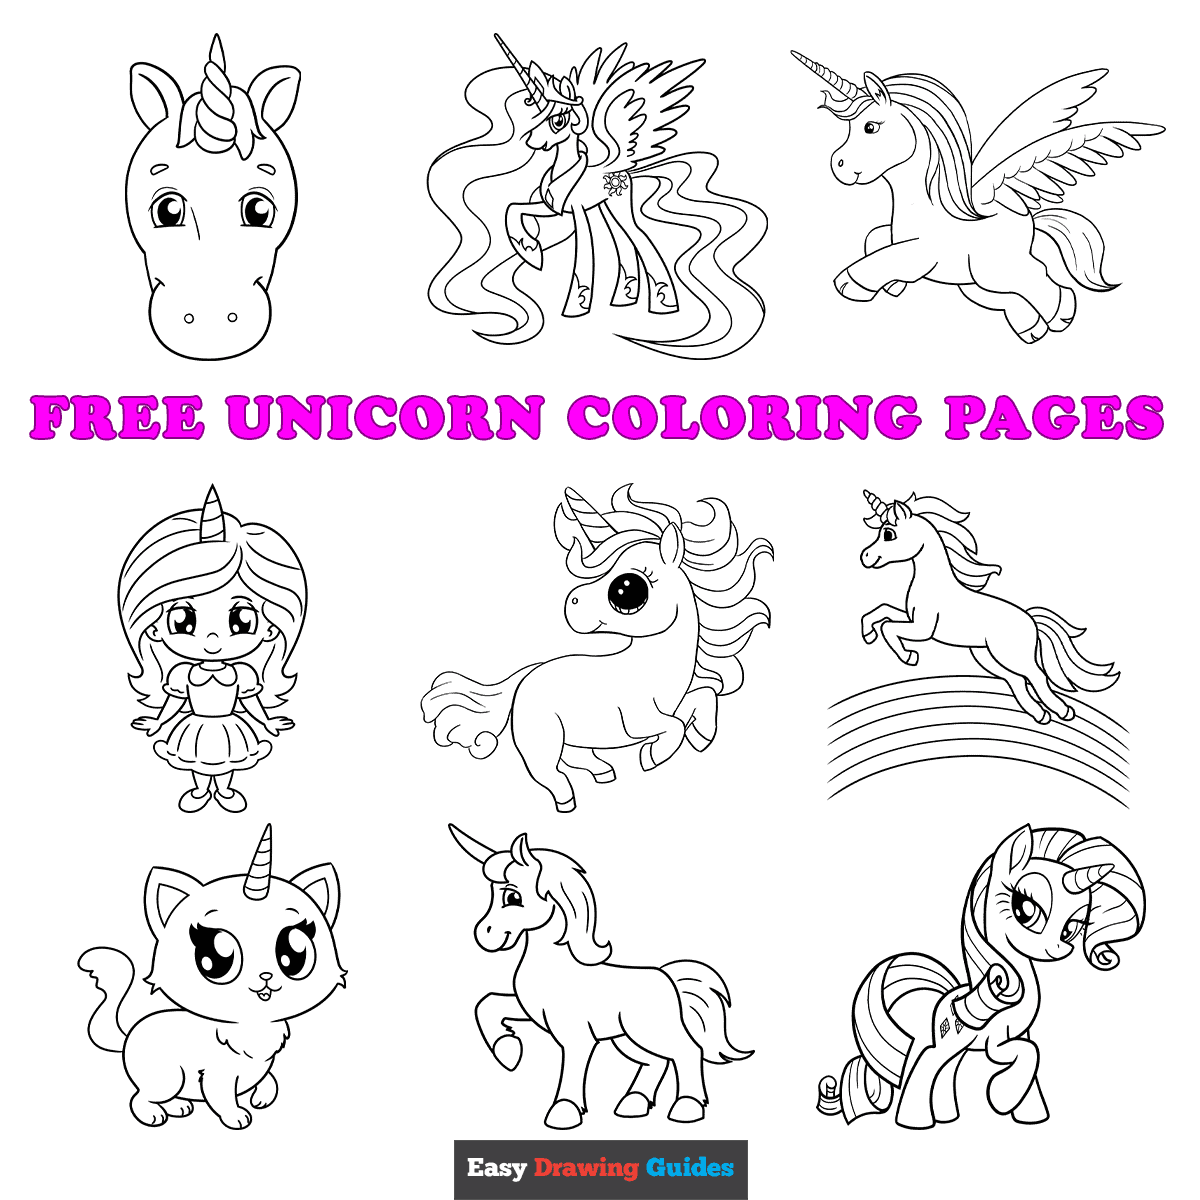 Free printable unicorn coloring pages for kids